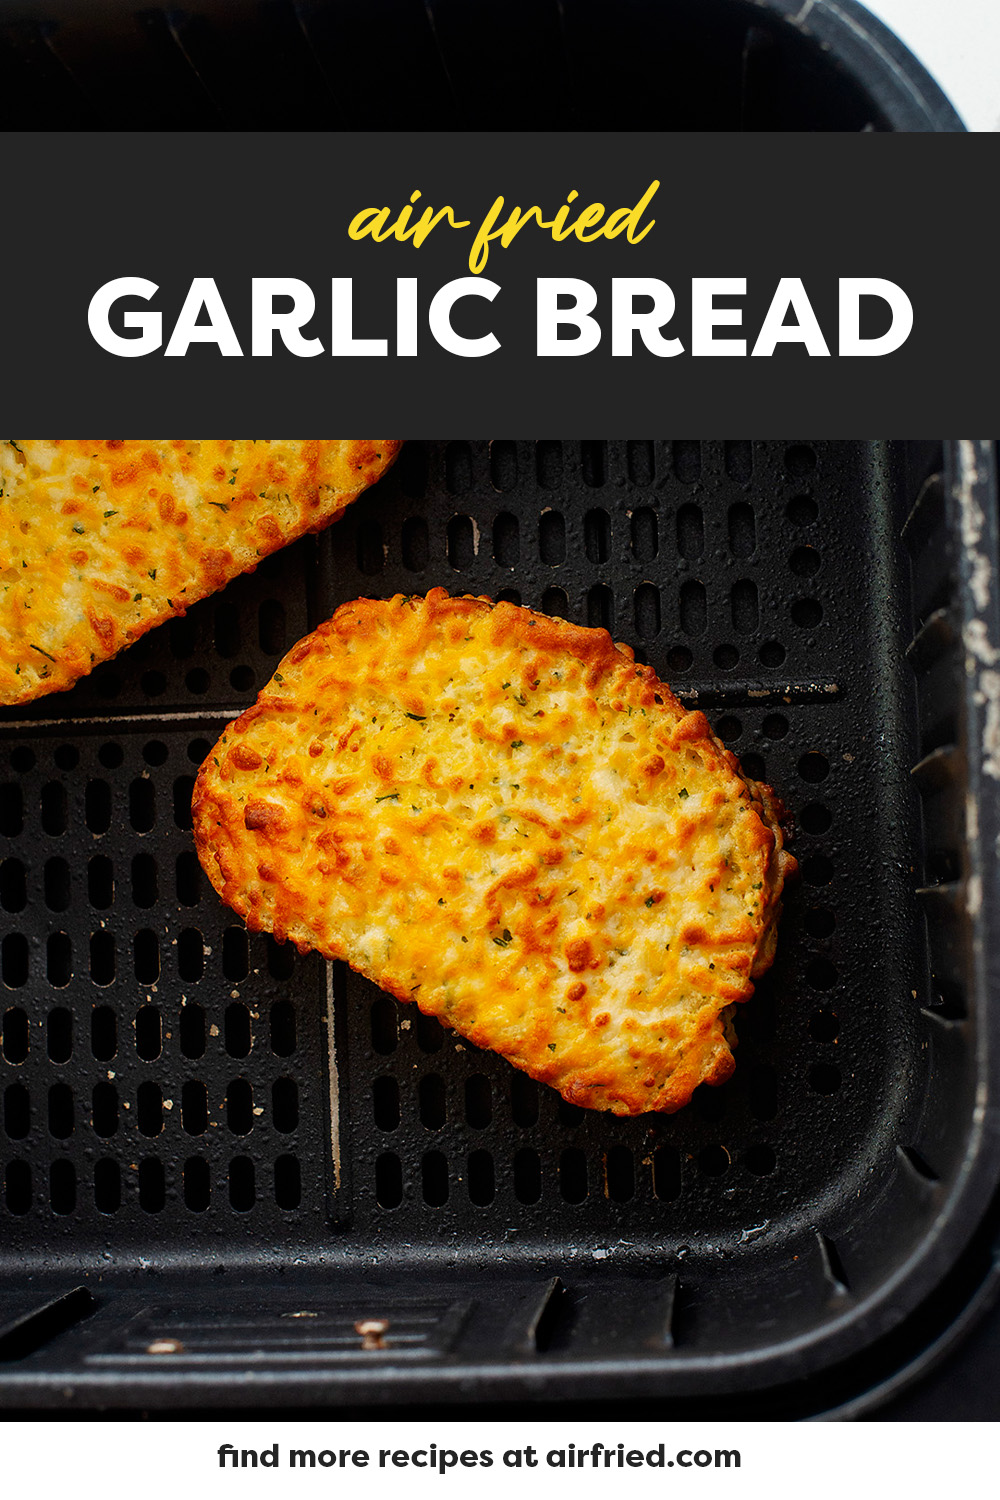 This frozen garlic bread cooks super quick in the air fryer.  You get a great crunch on the crust with a beautifully fluffy center even though it was frozen!